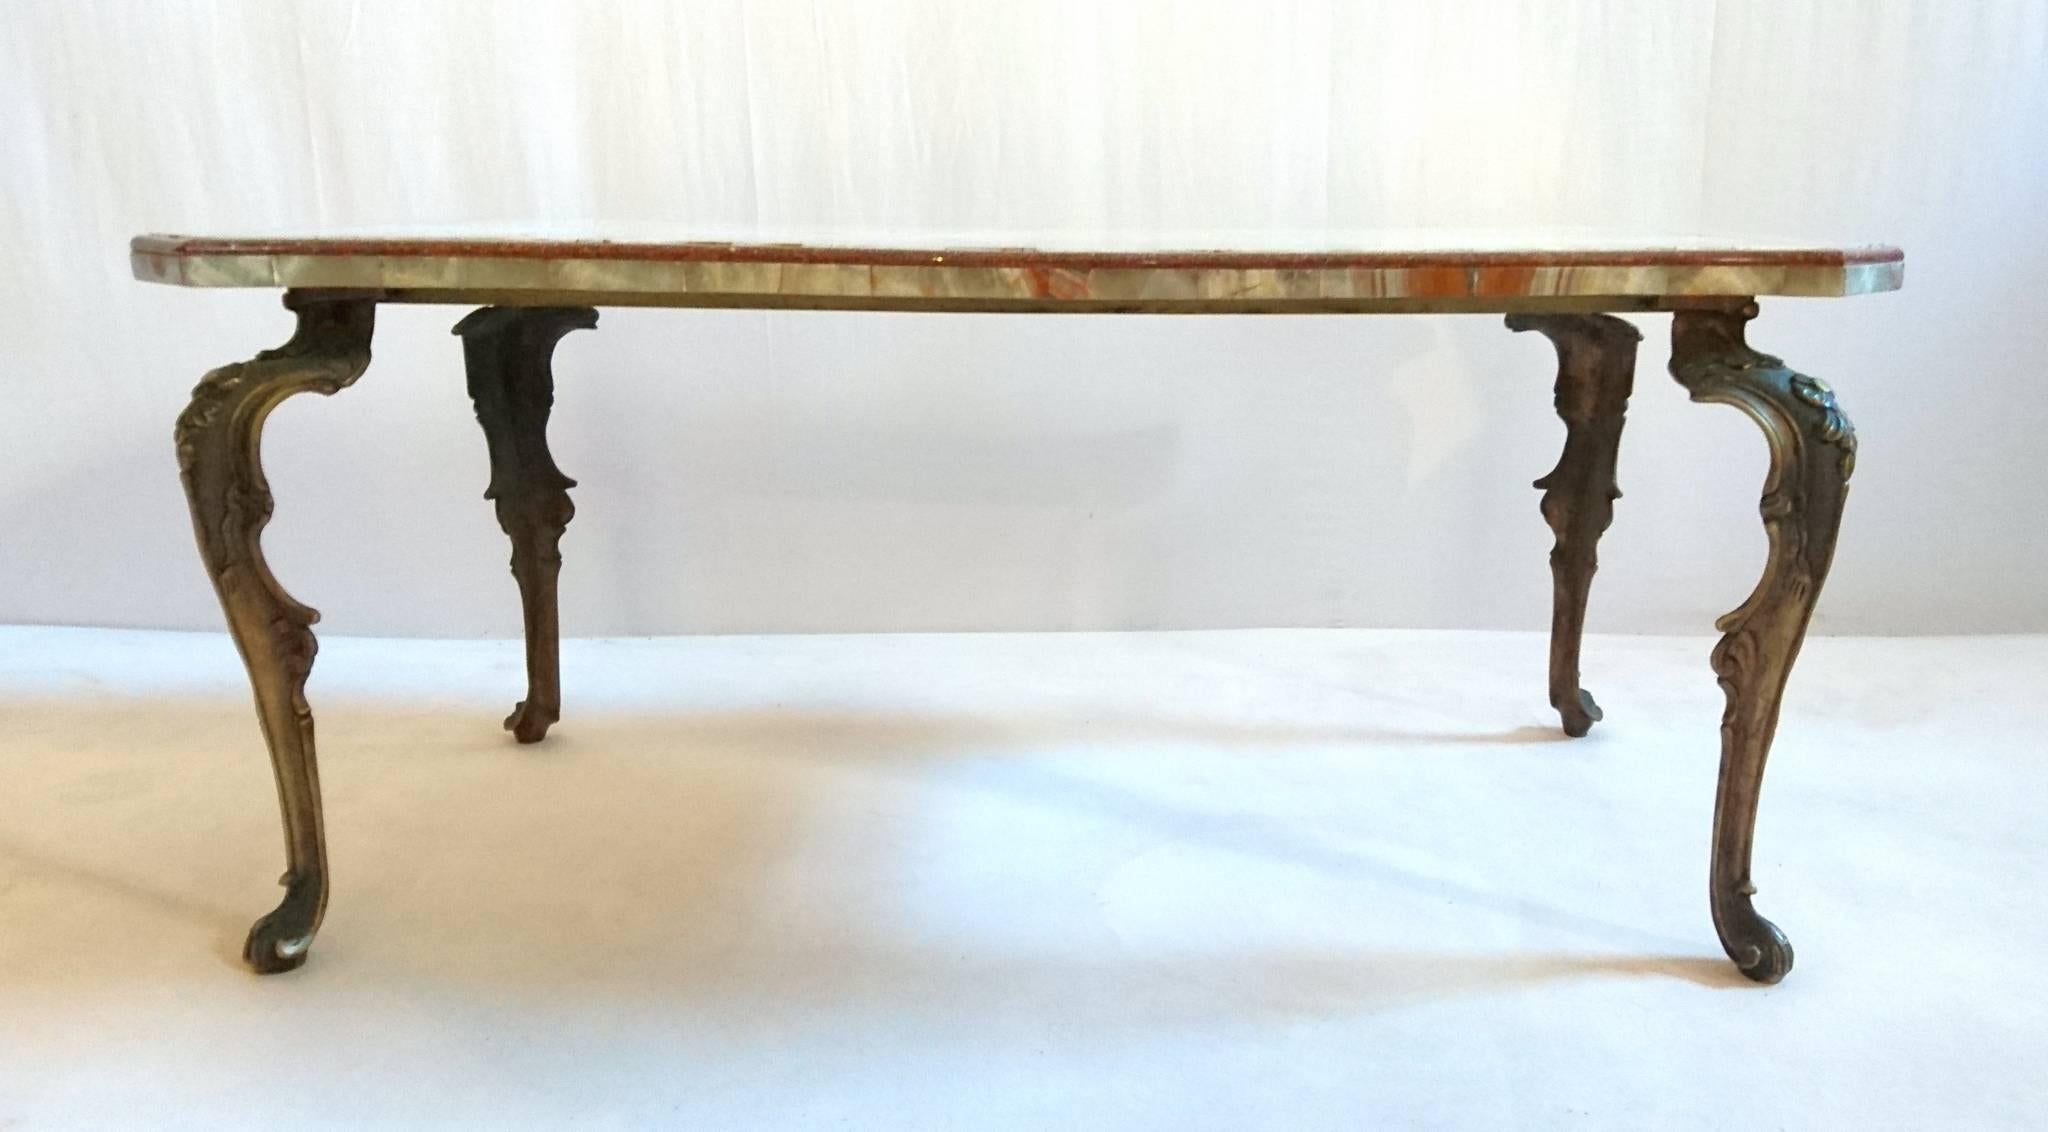 A super high quality 1950s coffee or cocktail table in Rococo style. The tabletop is made in onyx with inlaid red porphyry and the base is made from cast bronze.